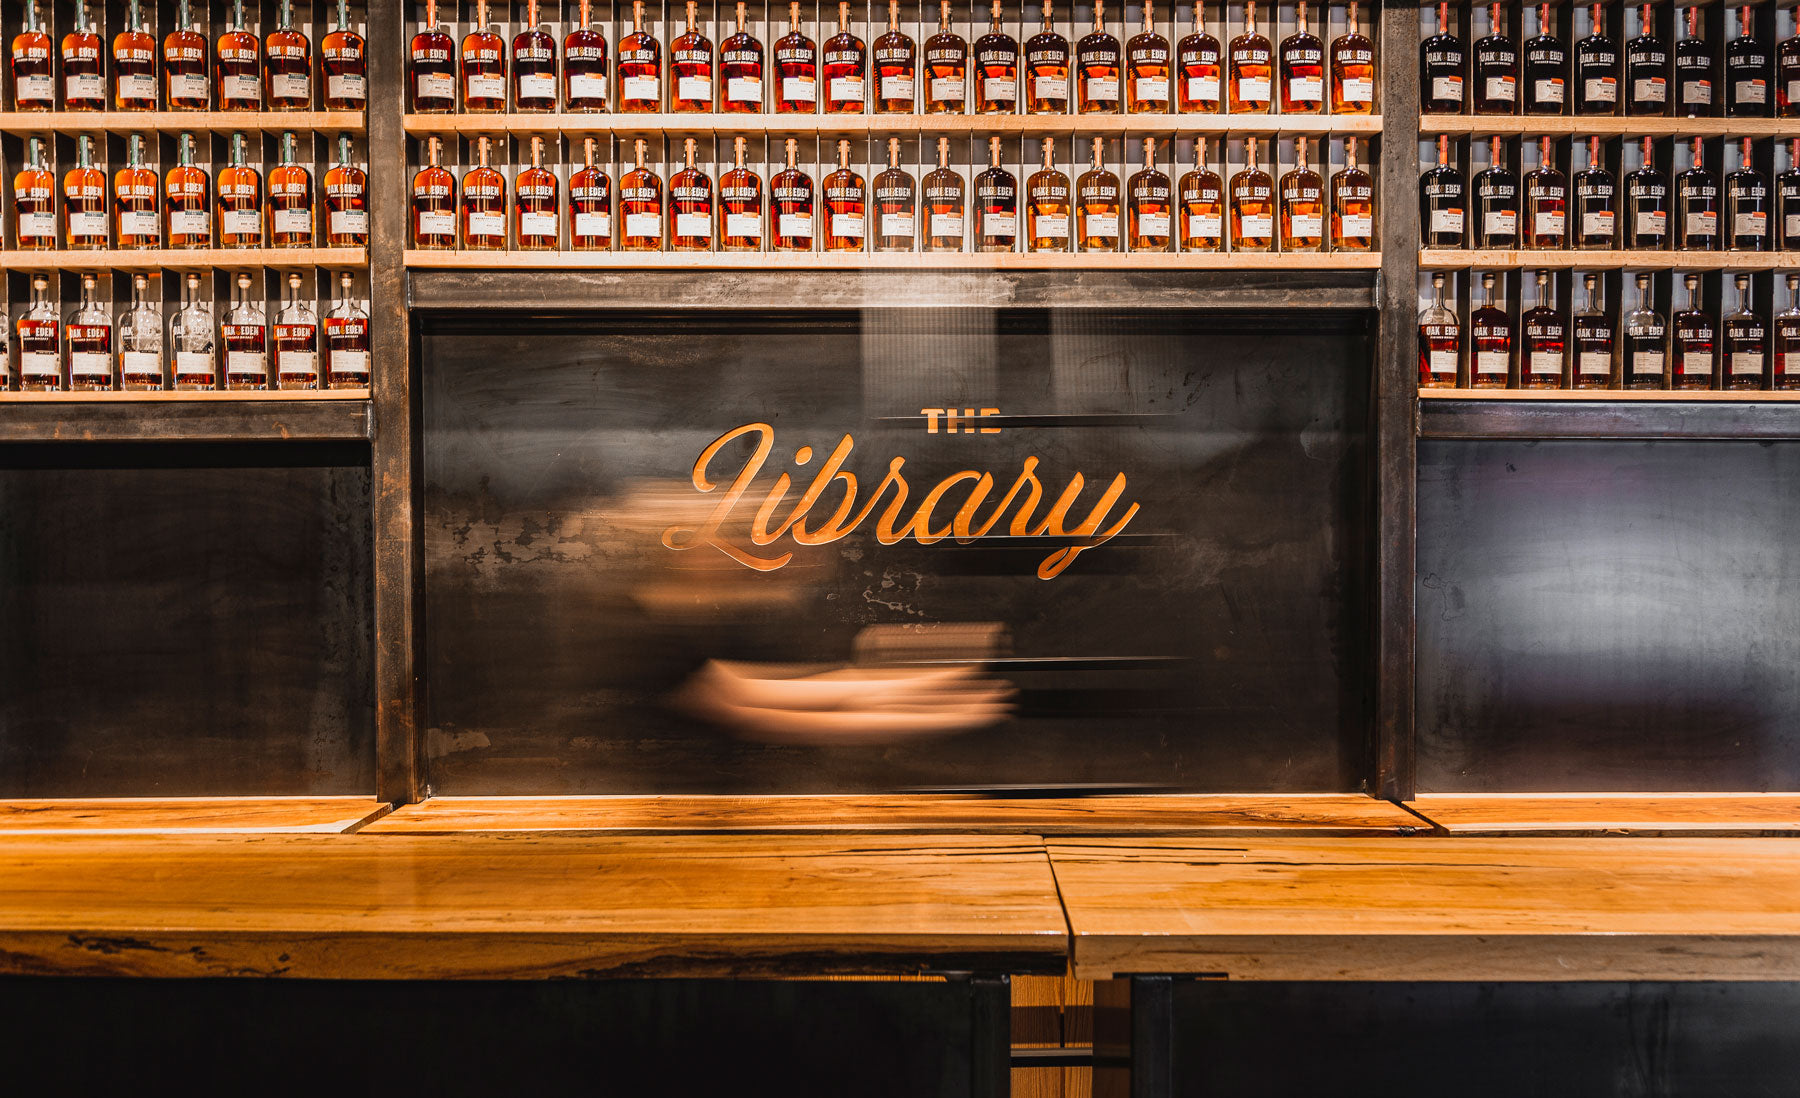 A wooden wall filled with bottles of Oak & Eden whiskey. The text on the wooden wall says The Library in script.